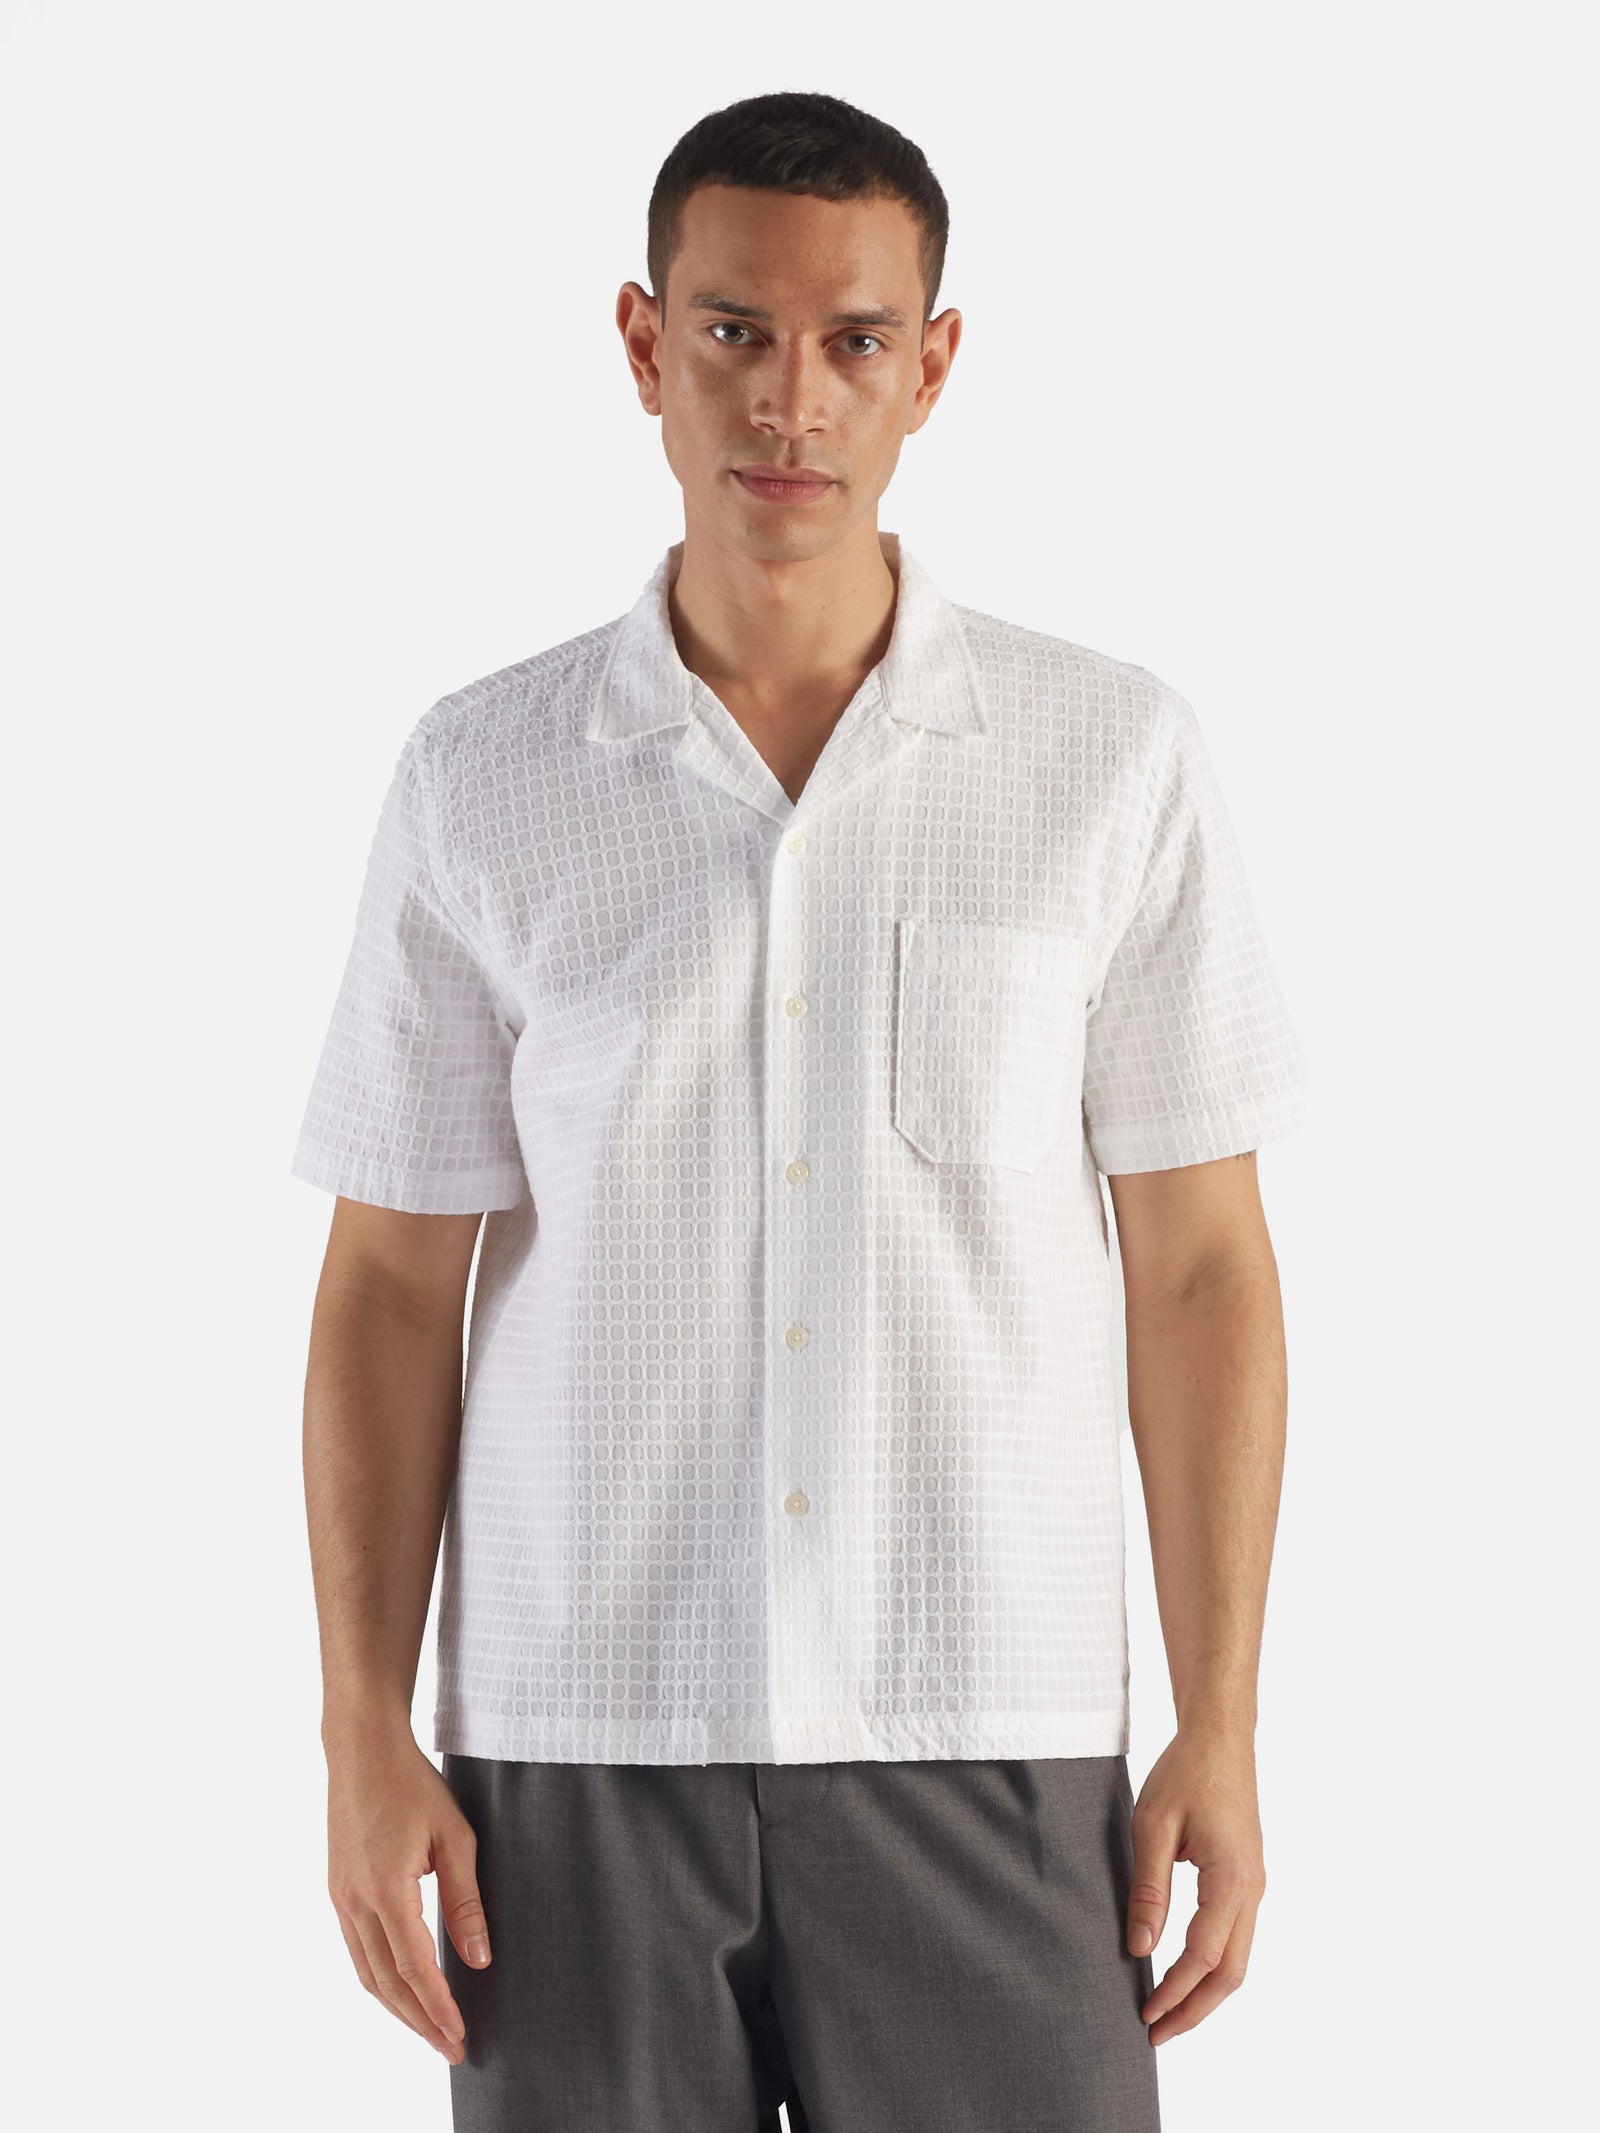 Universal Works Road Shirt in White Delos Cotton